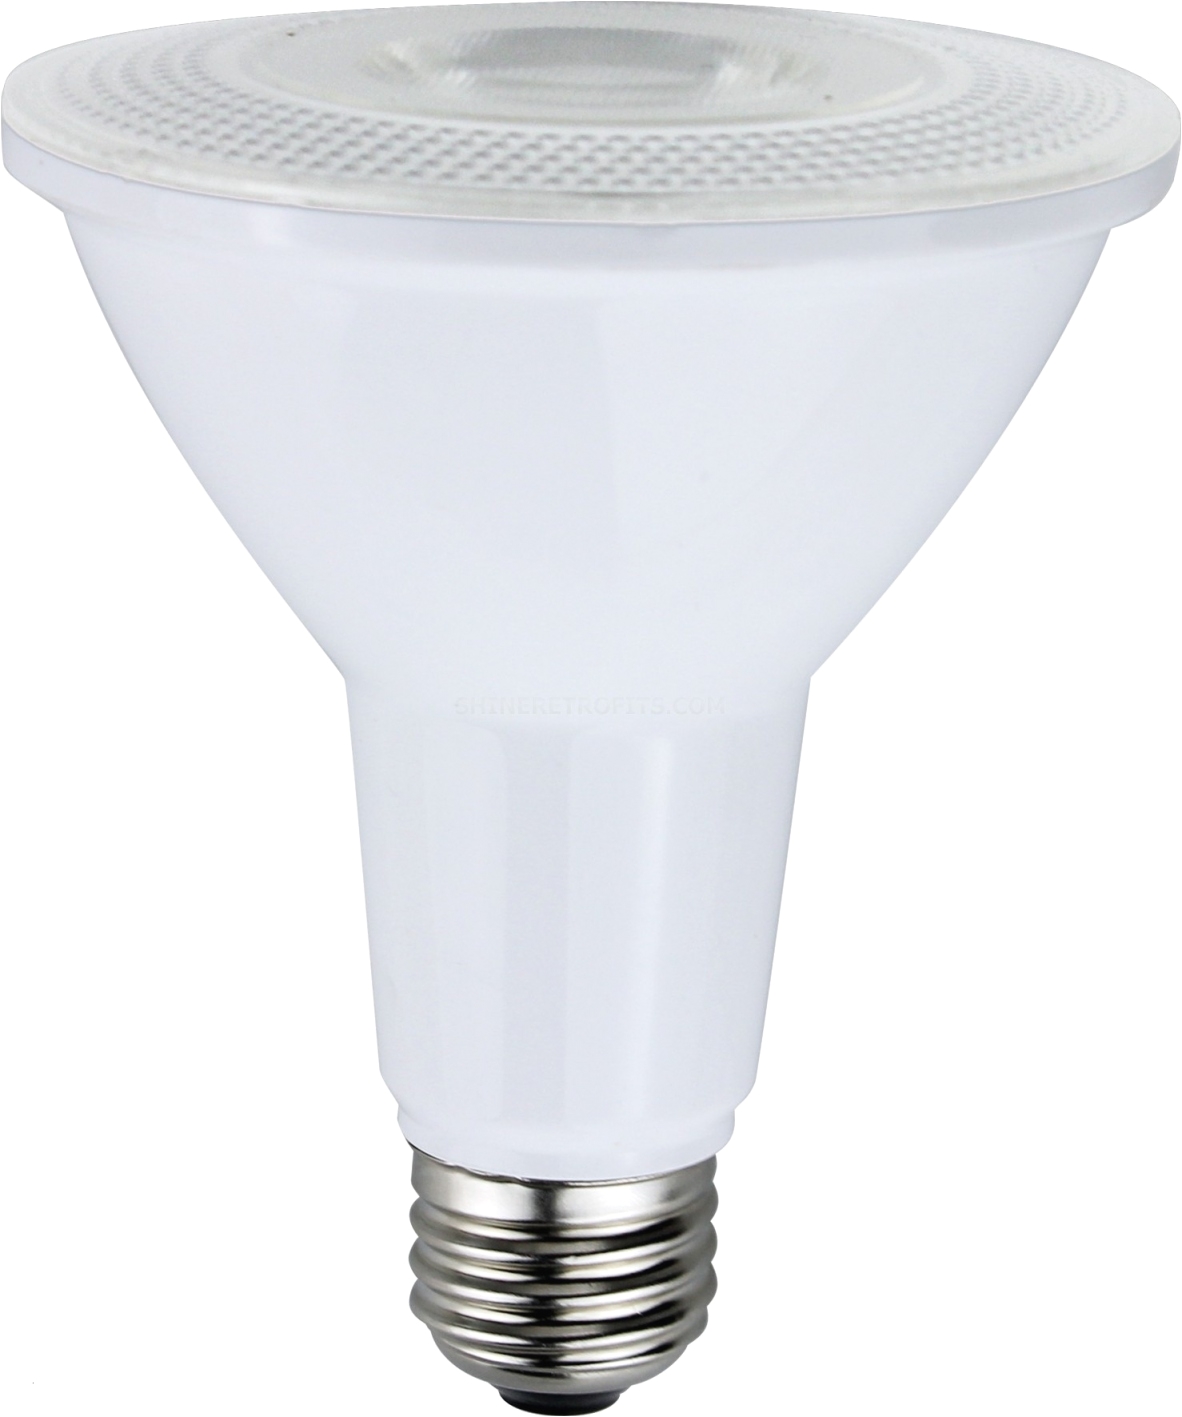 image of inspirierend philips led lamp